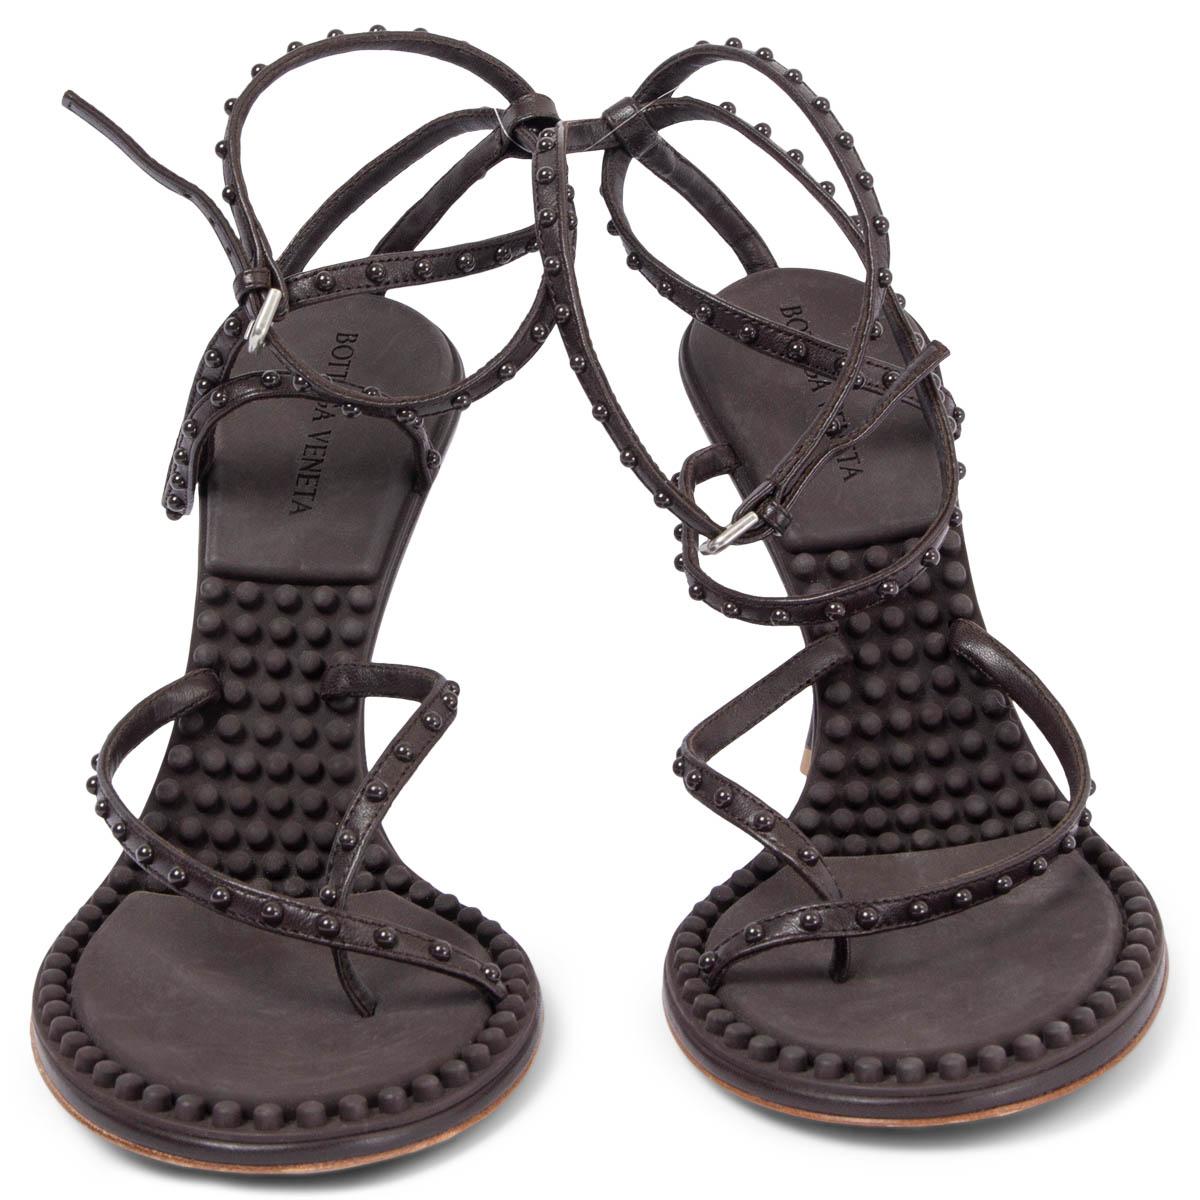 100% authentic Bottega Veneta Lagoon Bubble tonal lacquered stud sandals are crafted from dark brown nappa leather and embellished with tonal studs. The design features adjustable ankle straps, a shiny lacquered heel, and a rubber interior with